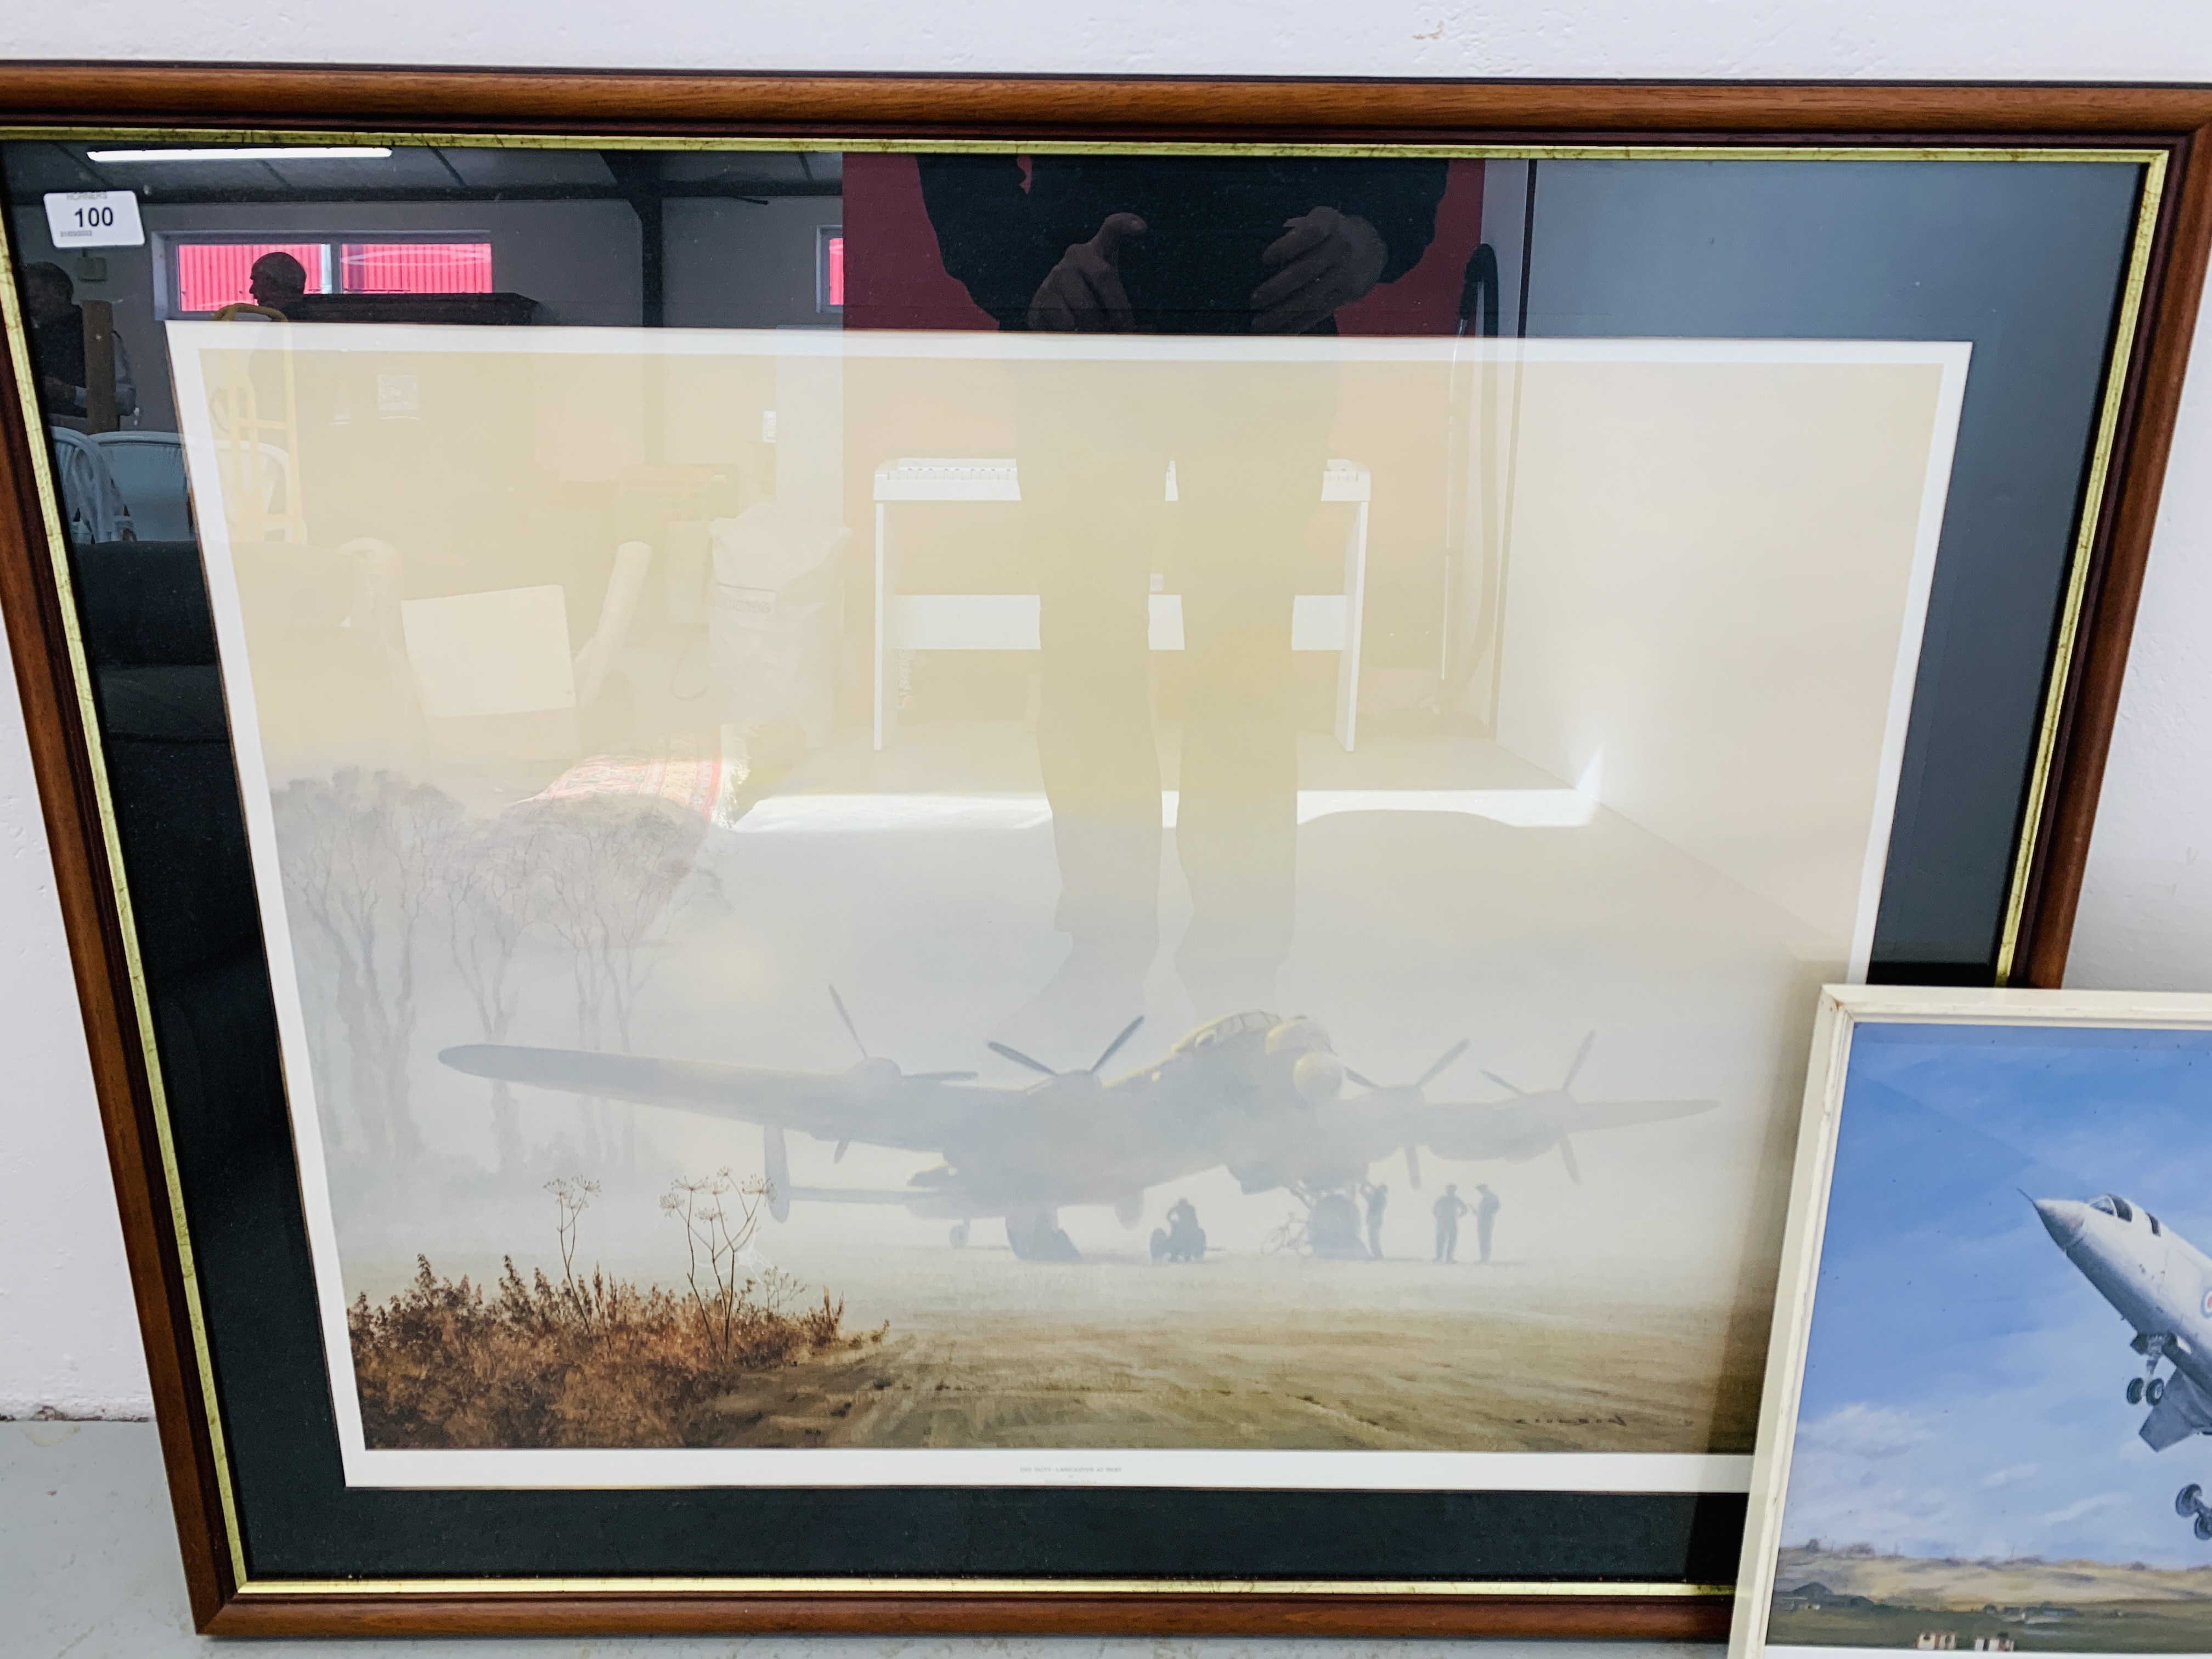 FRAMED "OFF DUTY LANCASTER AT REST" PRINT ALONG WITH A FRAMED "TSR2" PRINT BY SEAN ALBERTS. - Image 2 of 5